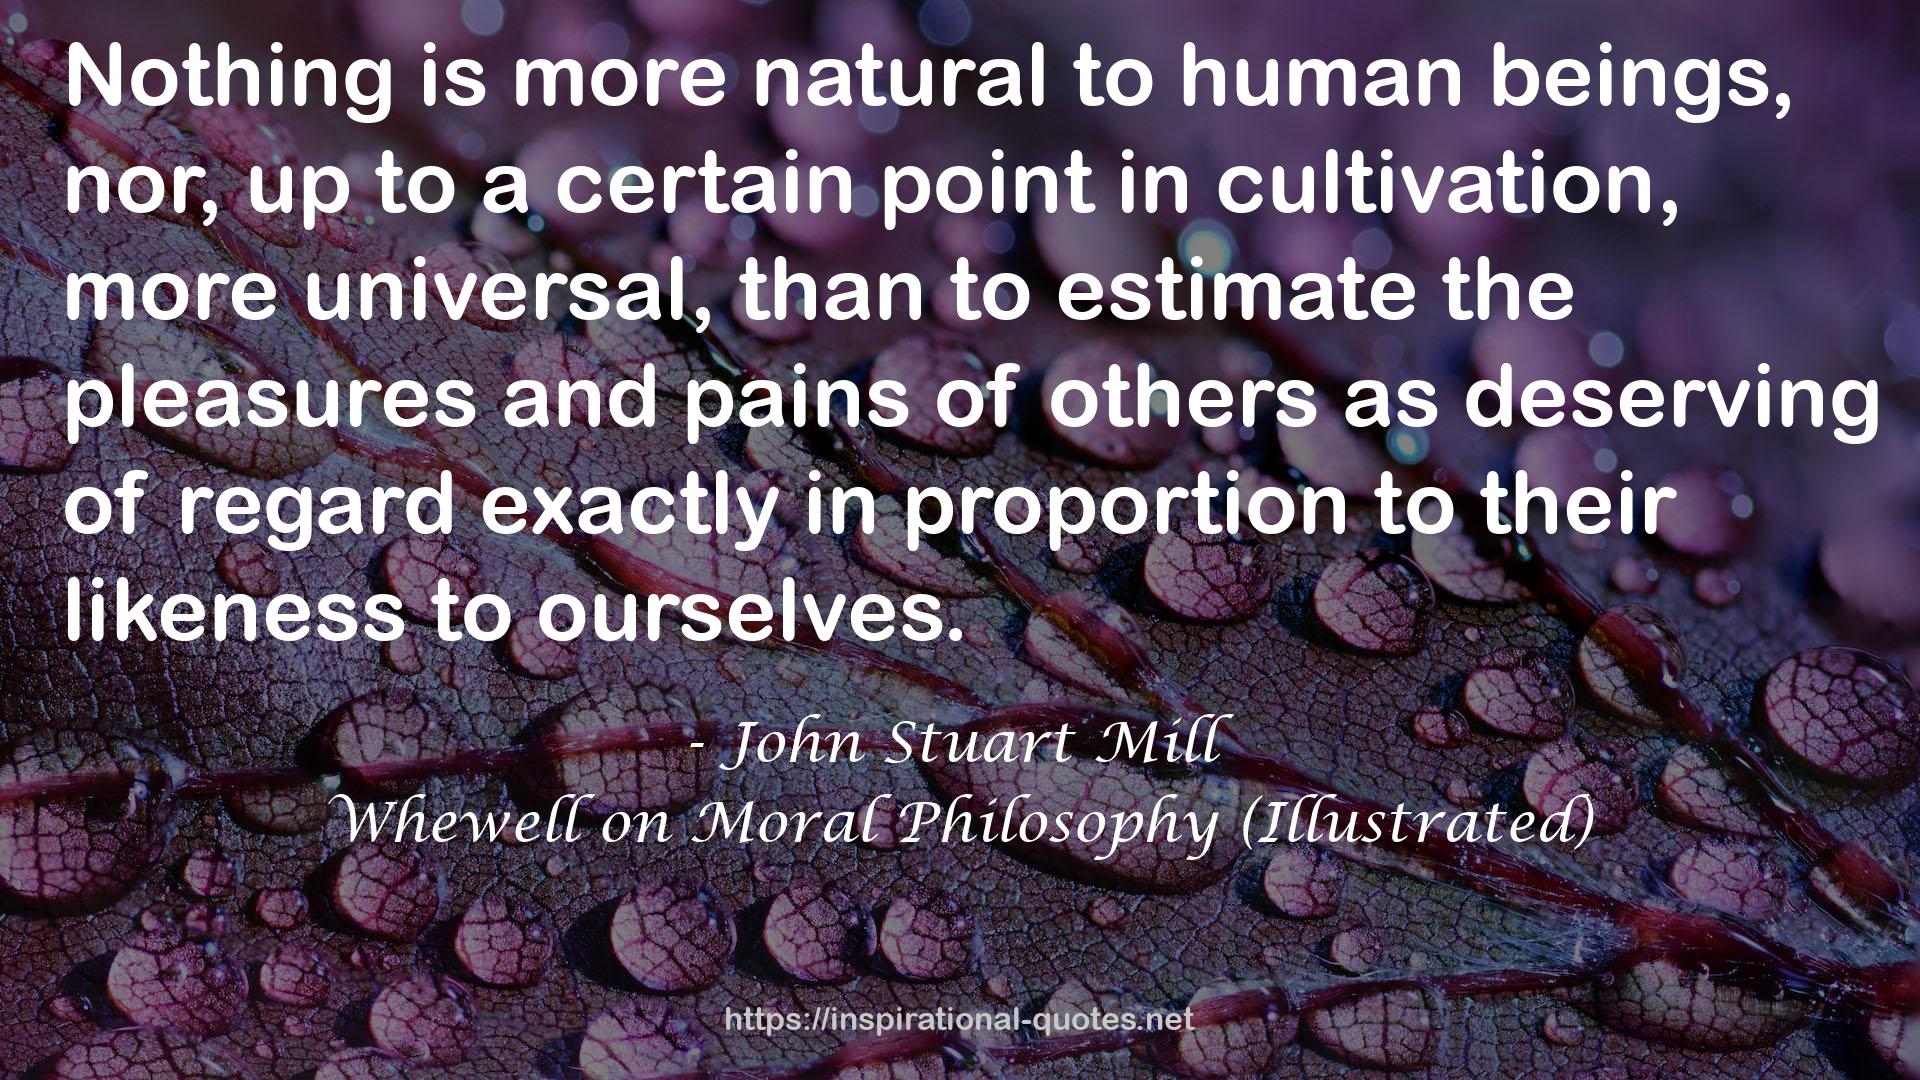 Whewell on Moral Philosophy (Illustrated) QUOTES